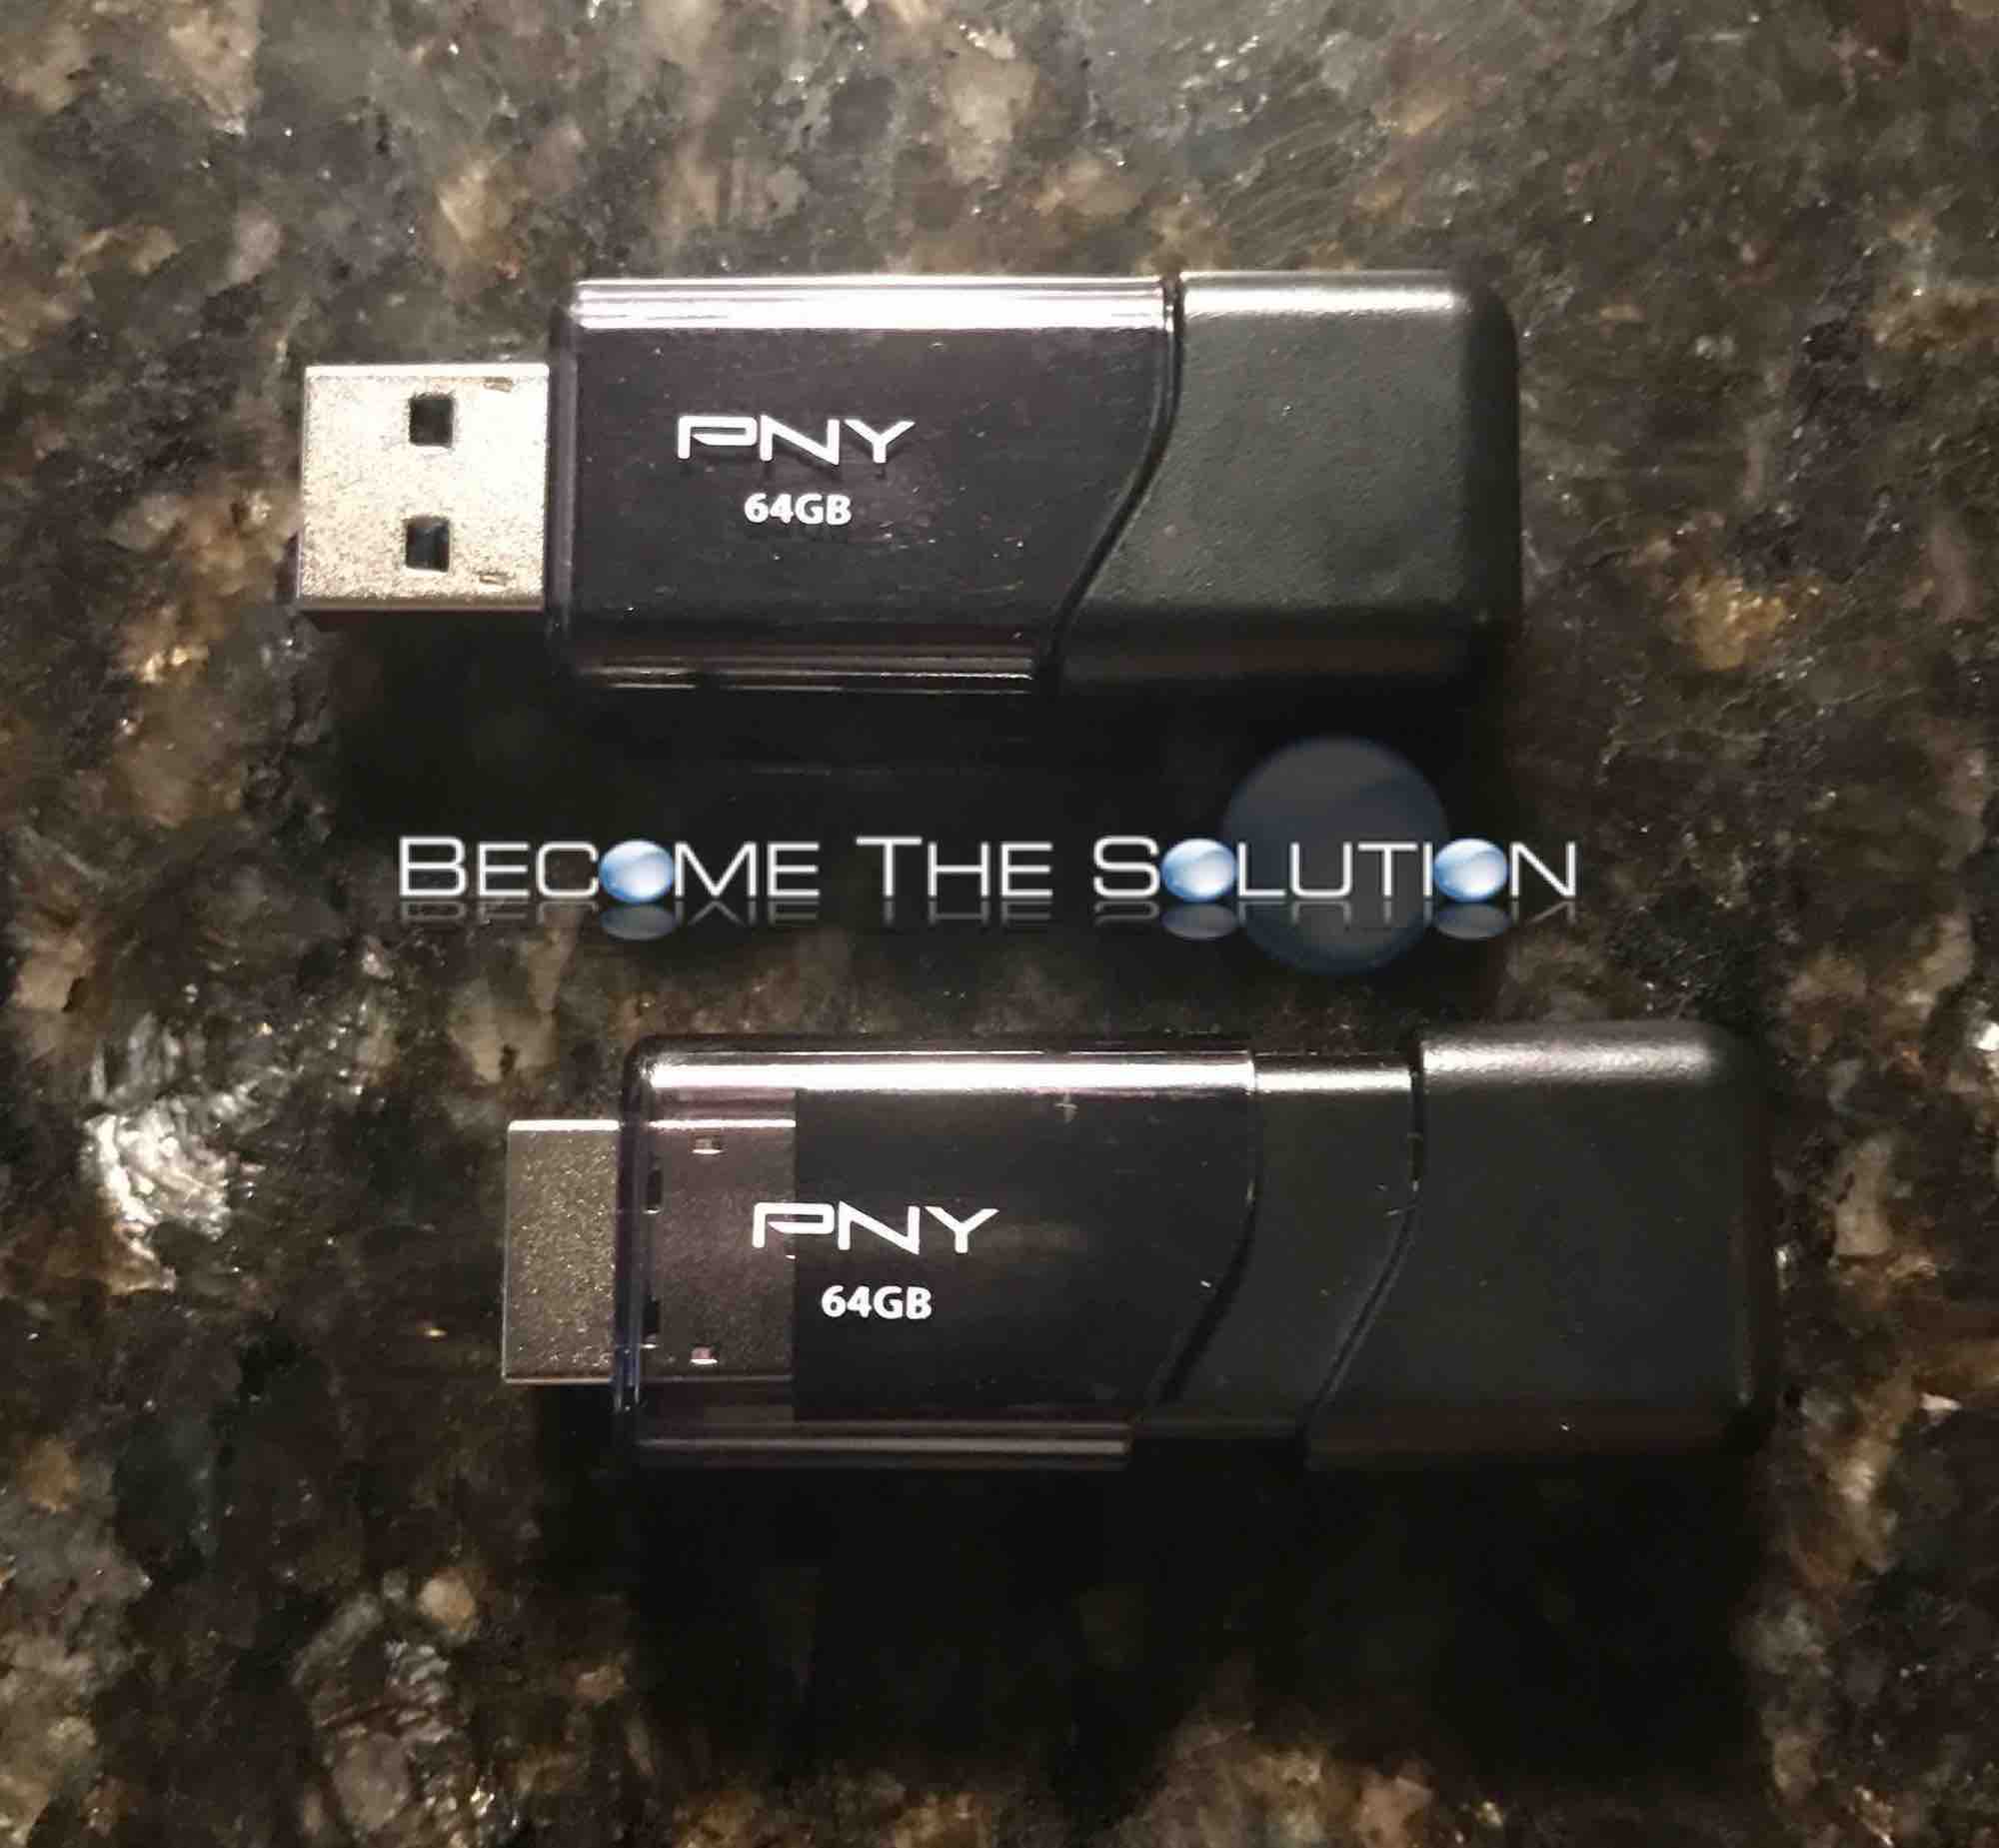 Pny 64gb flash drive review